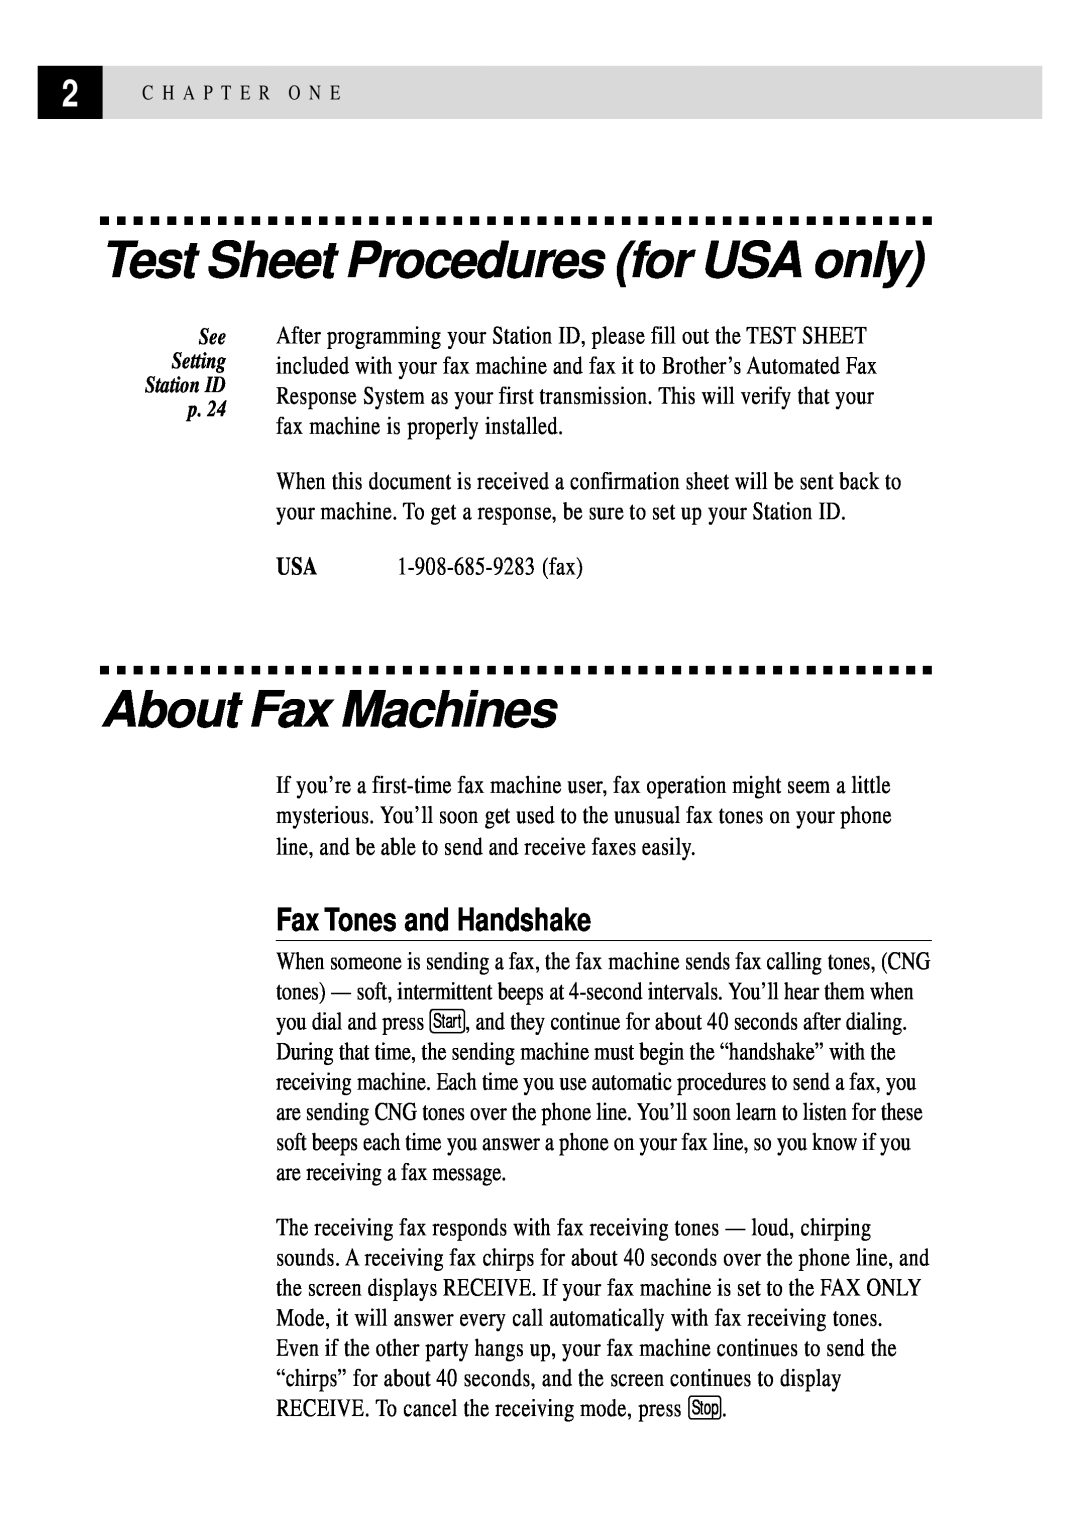 Brother FAX 255 owner manual Test Sheet Procedures for USA only, About Fax Machines, Fax Tones and Handshake 